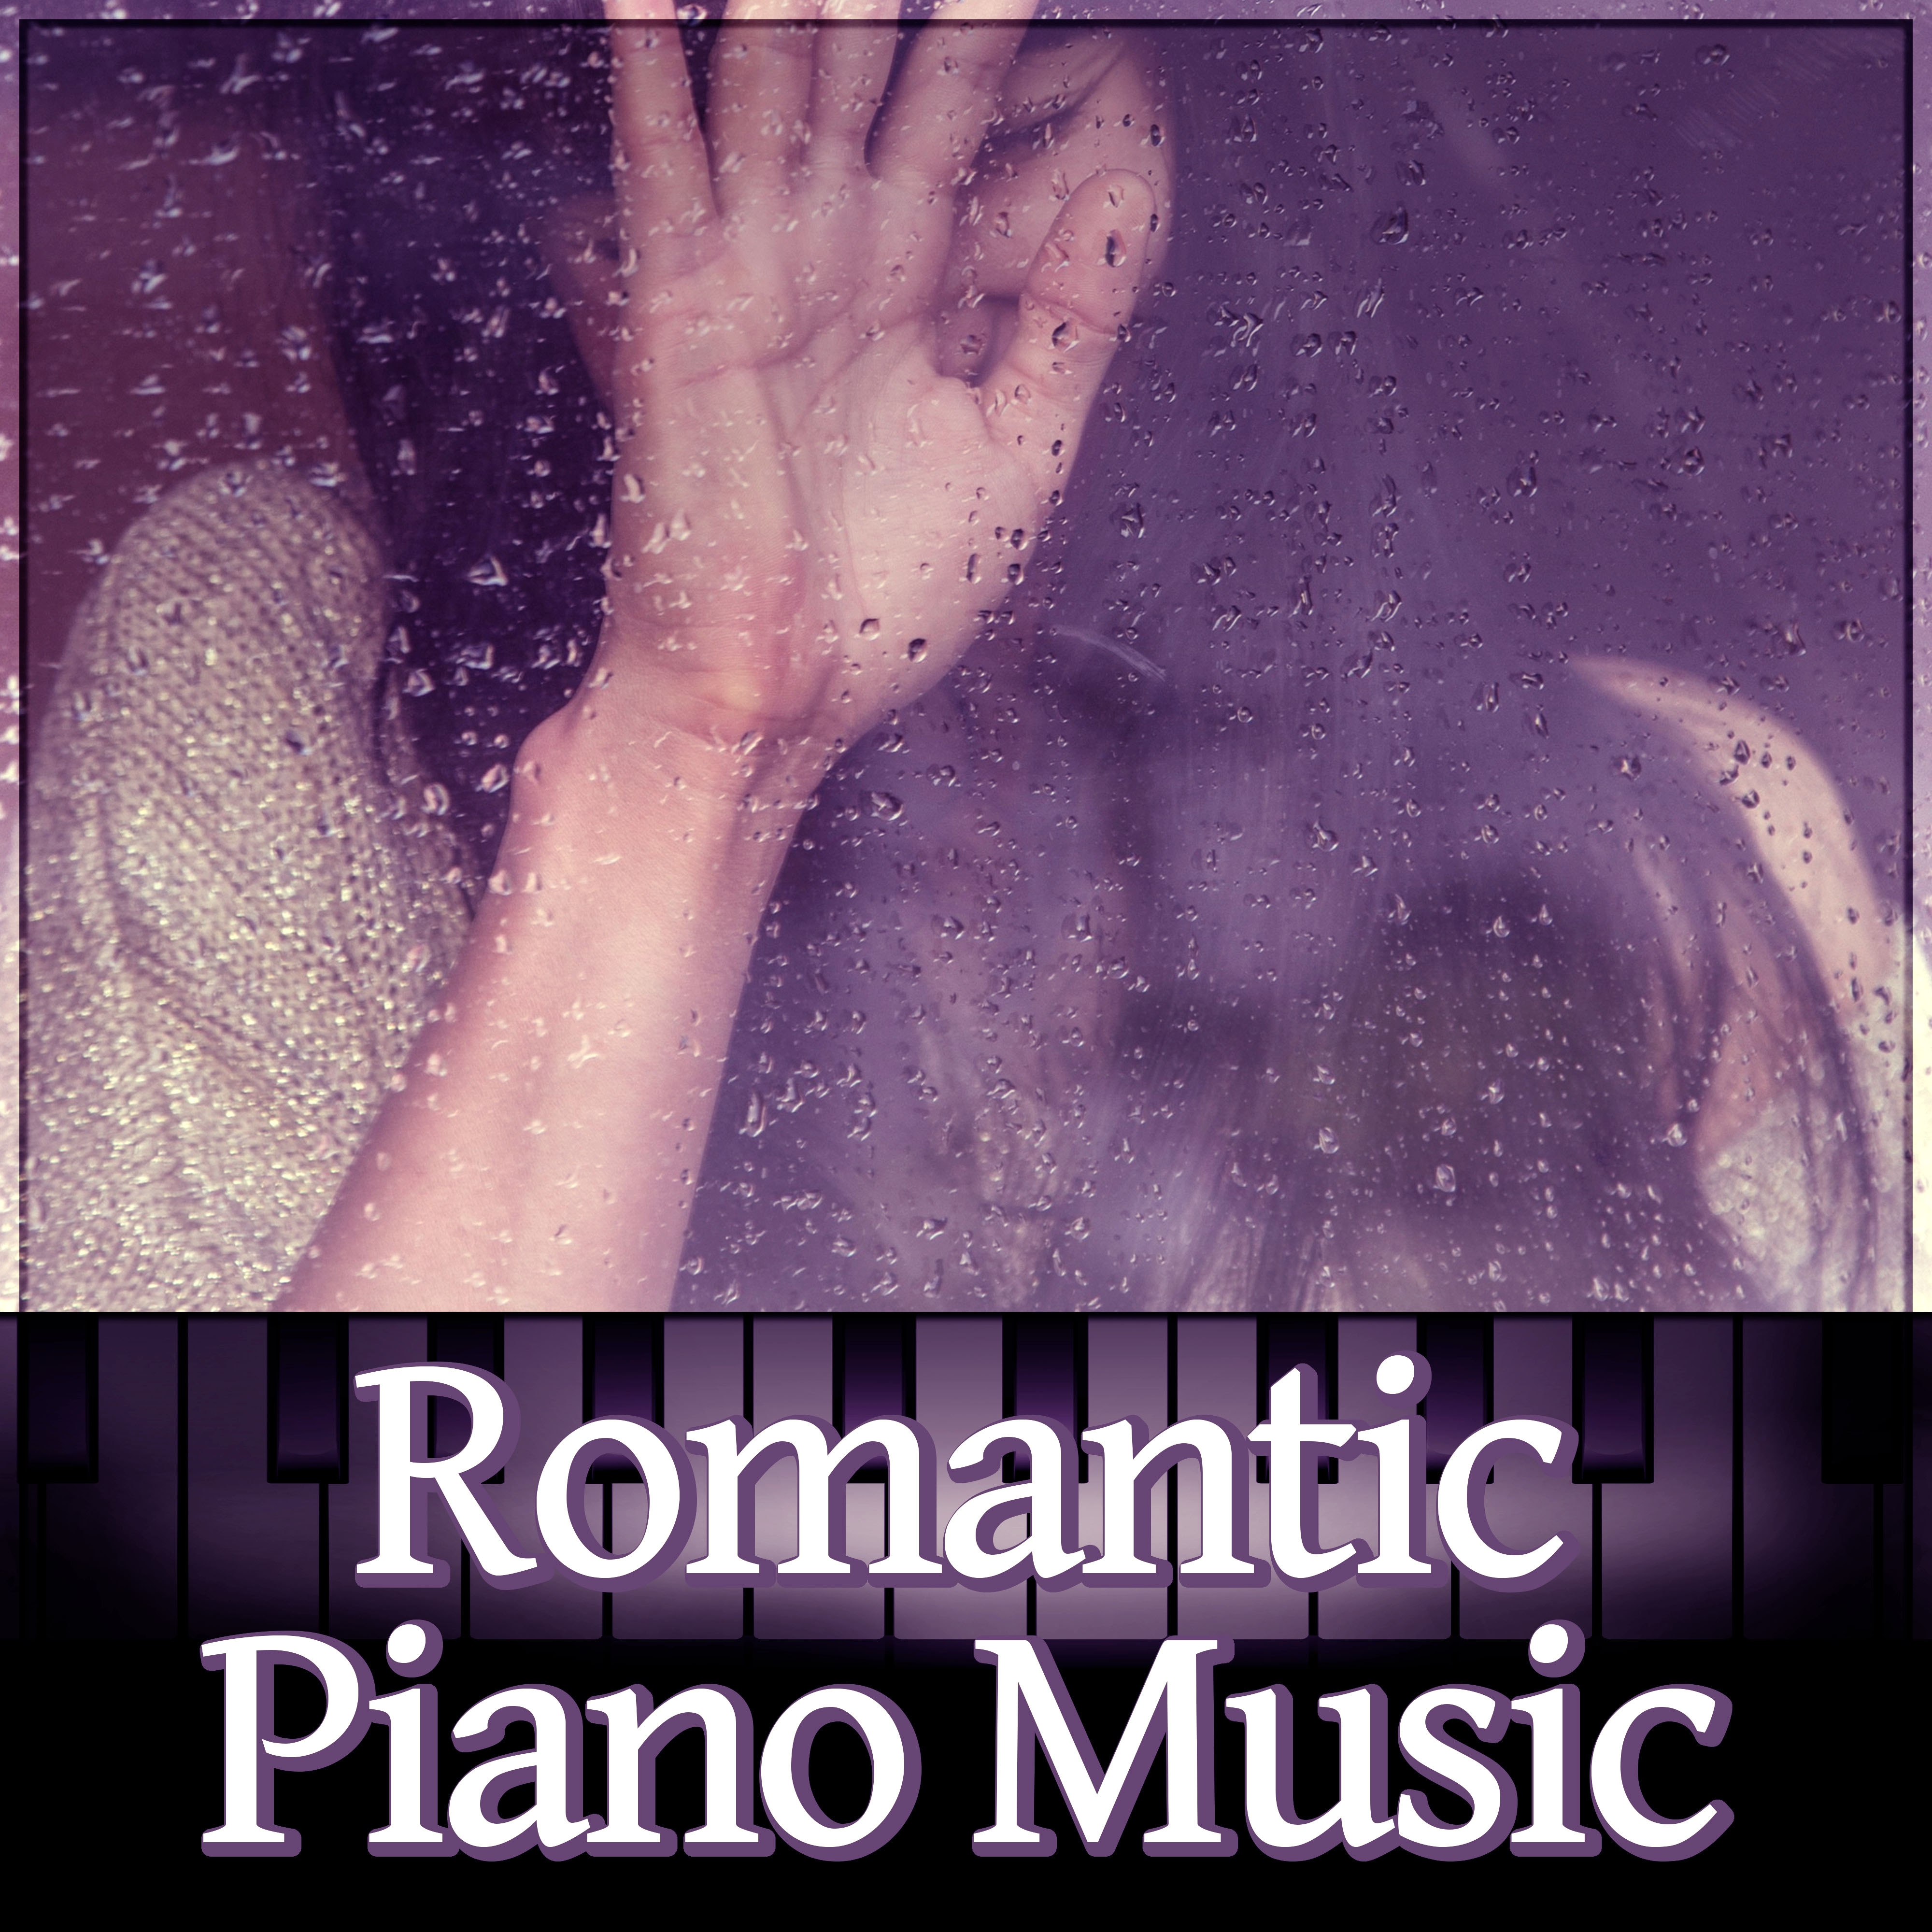 Romantic Piano Music – Romantic Piano Music, Love Songs, Candle Light Dinner, Relaxation Music, Date Night, Proposal, Anniversary